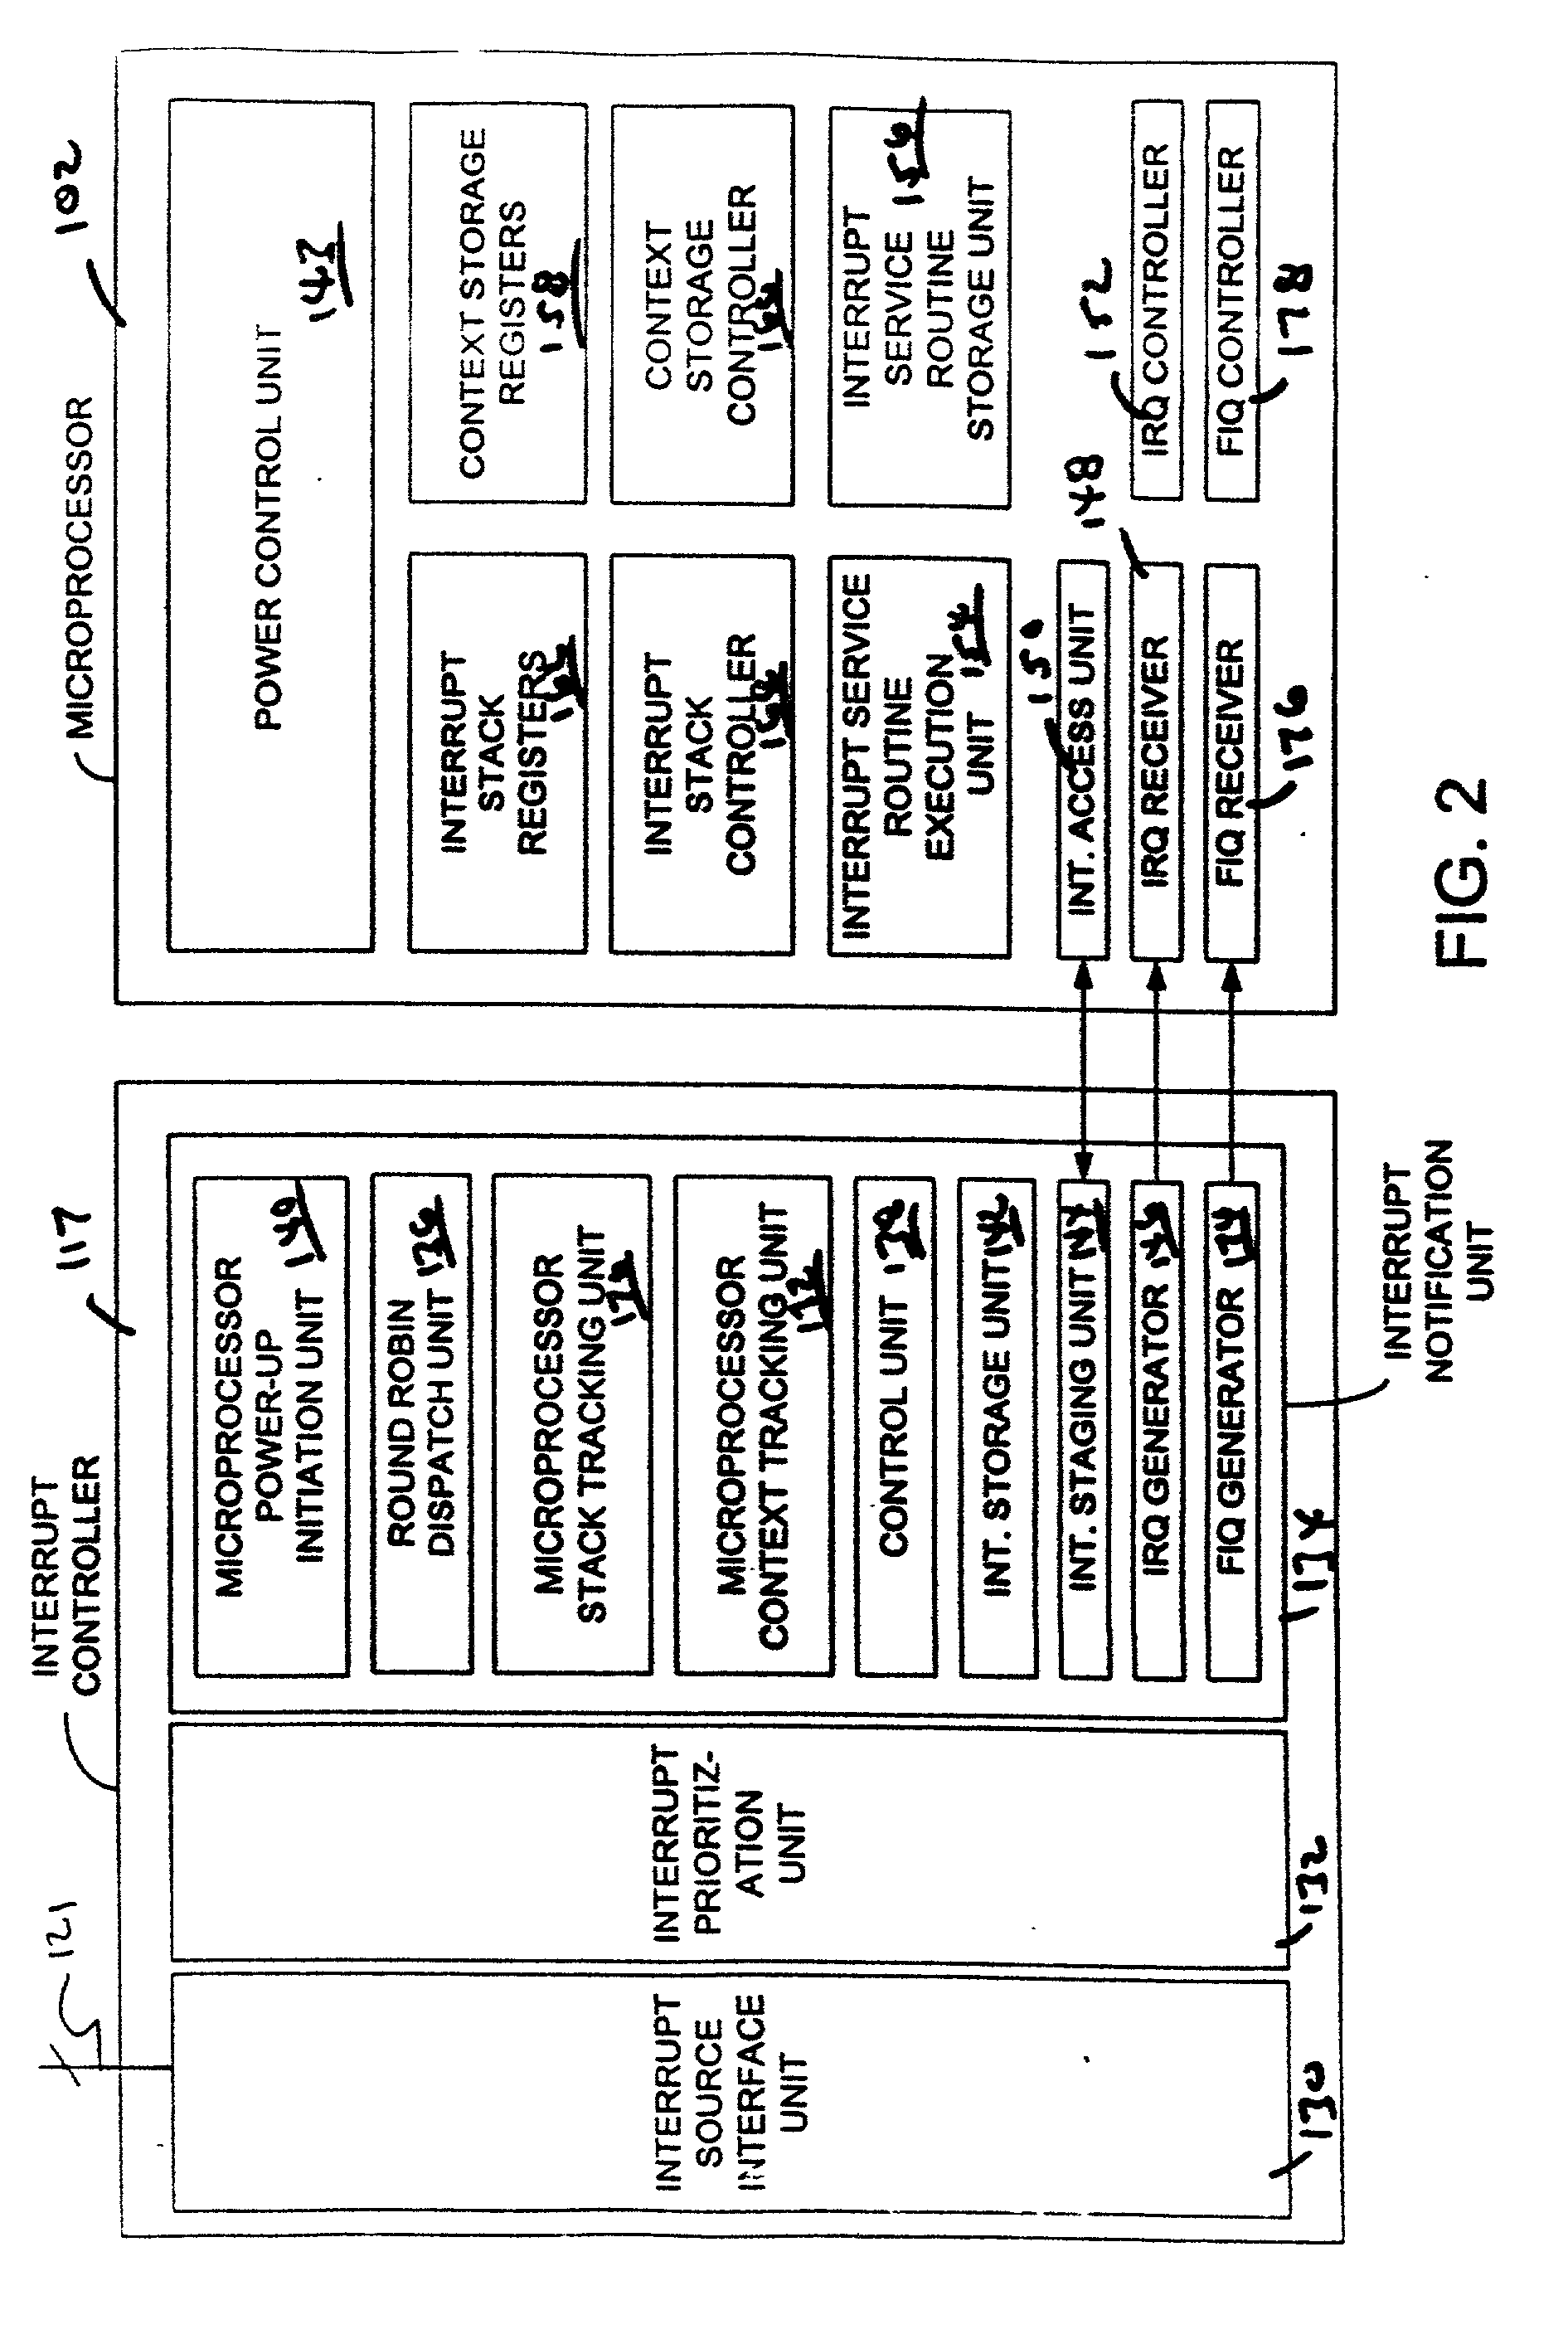 Mobile communication device having a prioritized interrupt controller